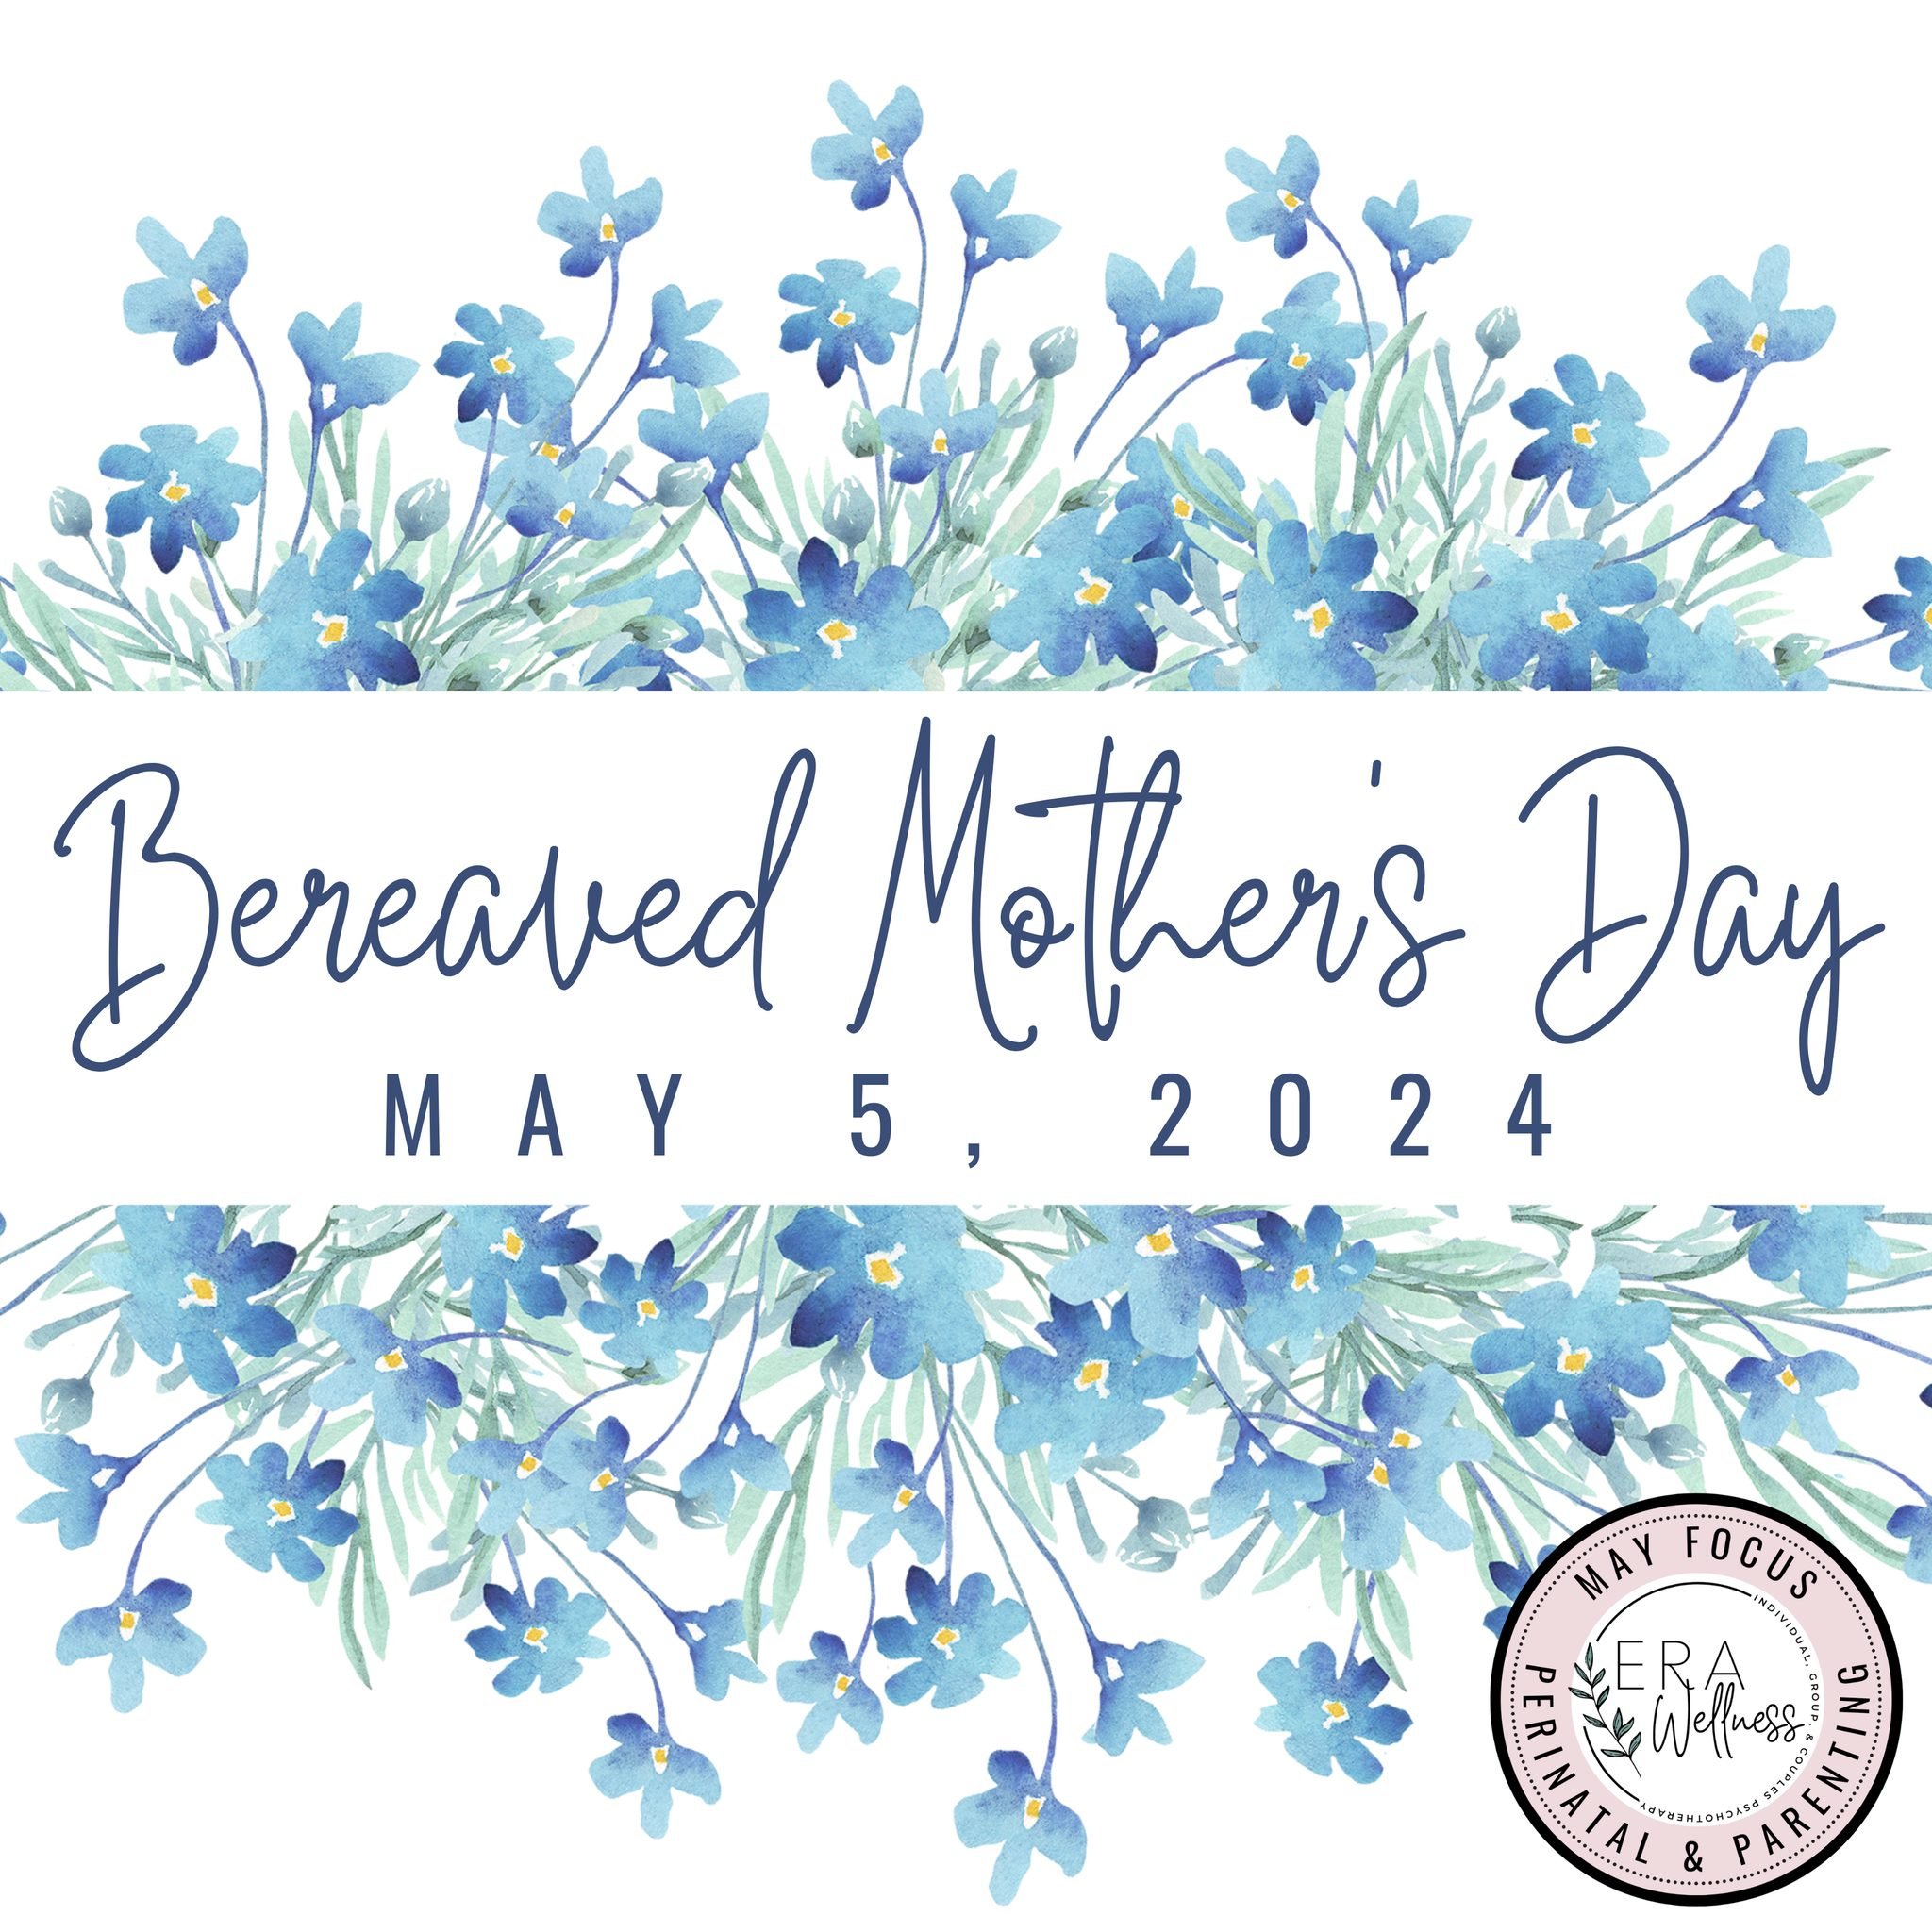 Bereaved Mother's Day - May 5, 2024

The Sunday before the traditionally observed Mother's Day is held as Bereaved Mother's Day. This day recognizes and honors all of the mothers who do not have their child in their arms due to pregnancy or child los